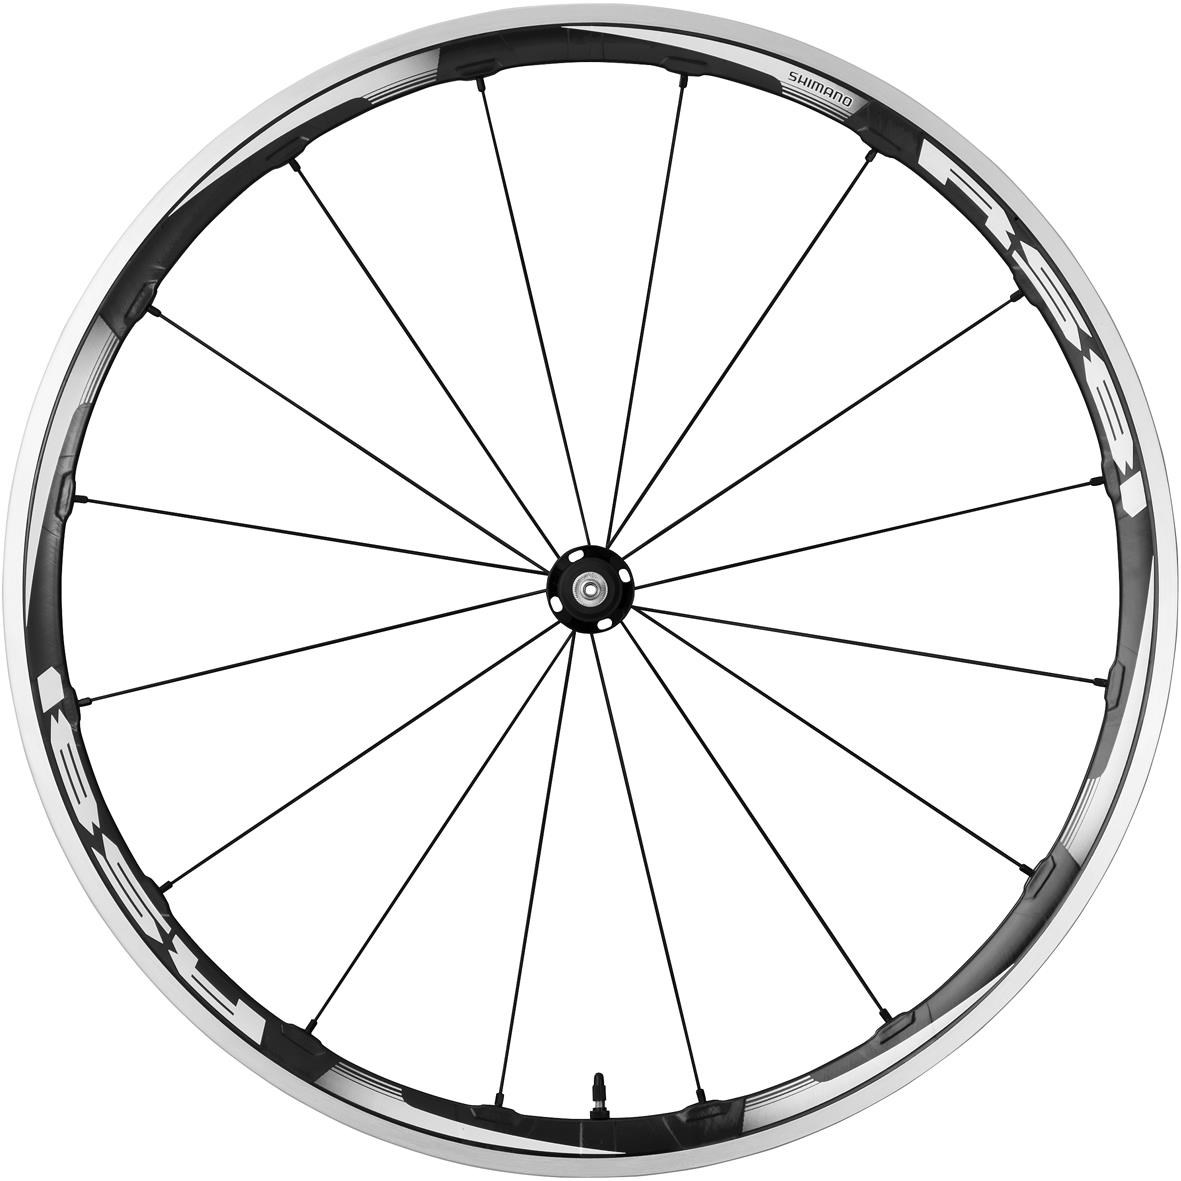 Shimano WH-RS81-C35-TL Wheel - Tubeless Ready Clincher 35 mm - Front product image